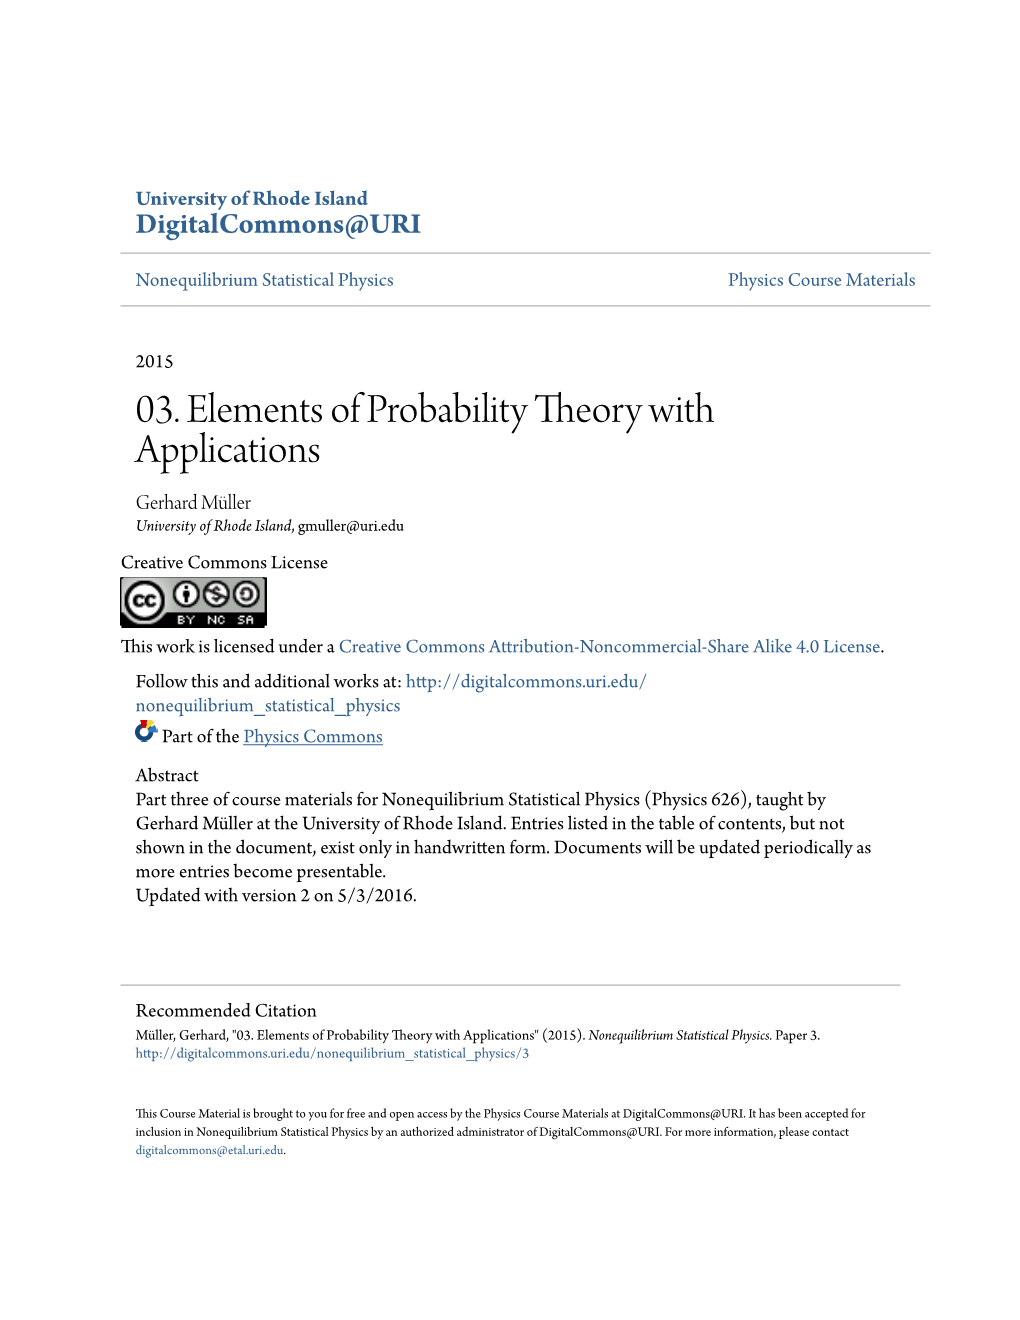 03. Elements of Probability Theory with Applications Gerhard Müller University of Rhode Island, Gmuller@Uri.Edu Creative Commons License